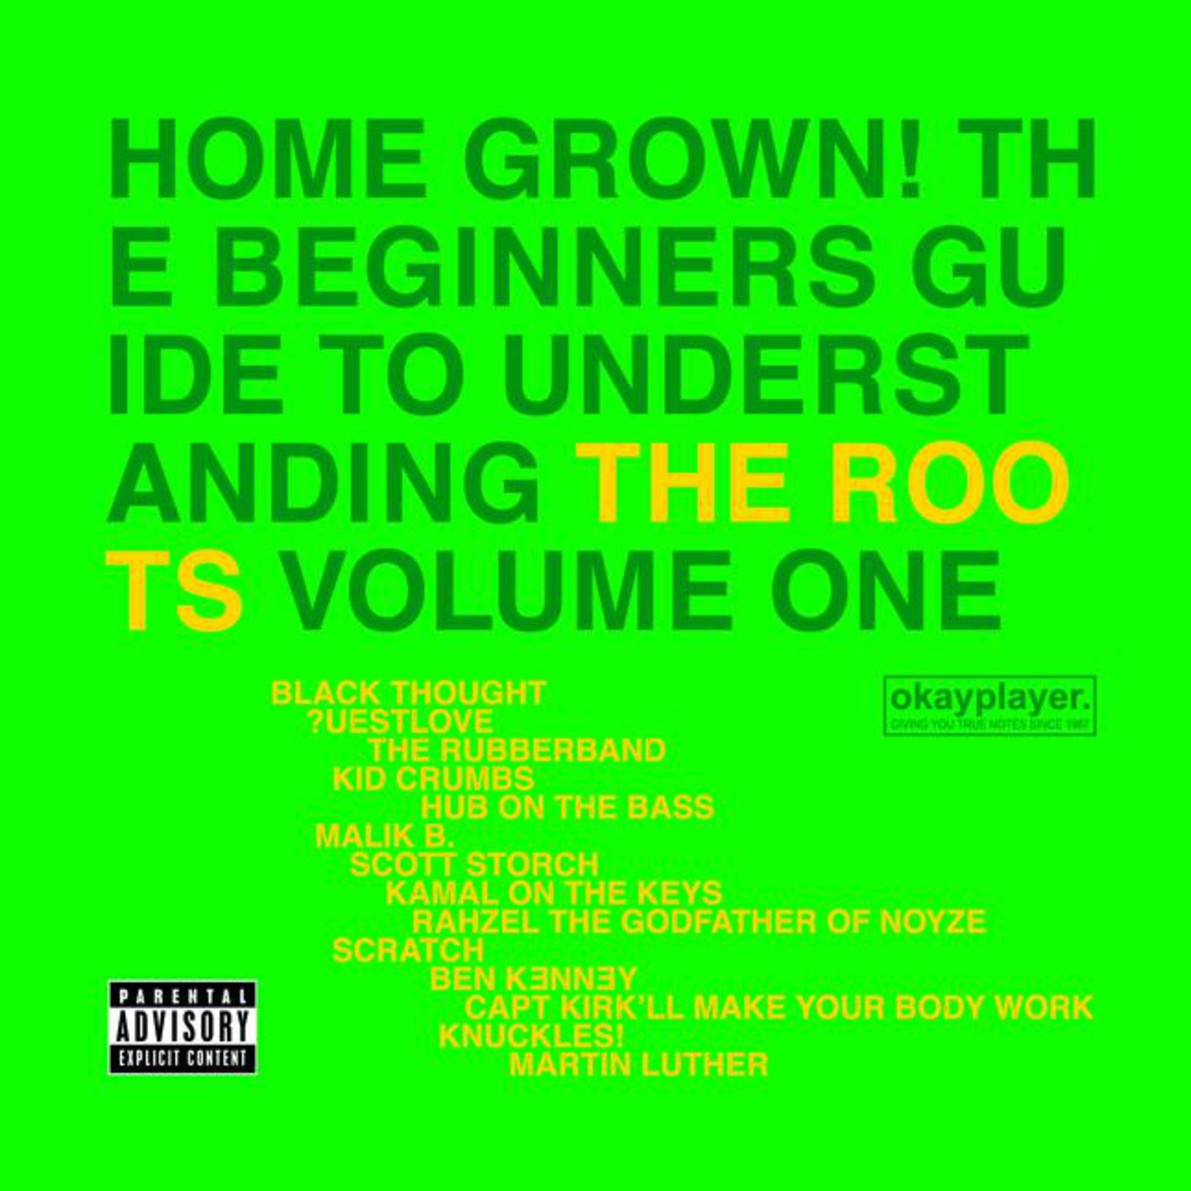 Home Grown! The Beginner's Guide to Understanding the Roots, Vol. 1